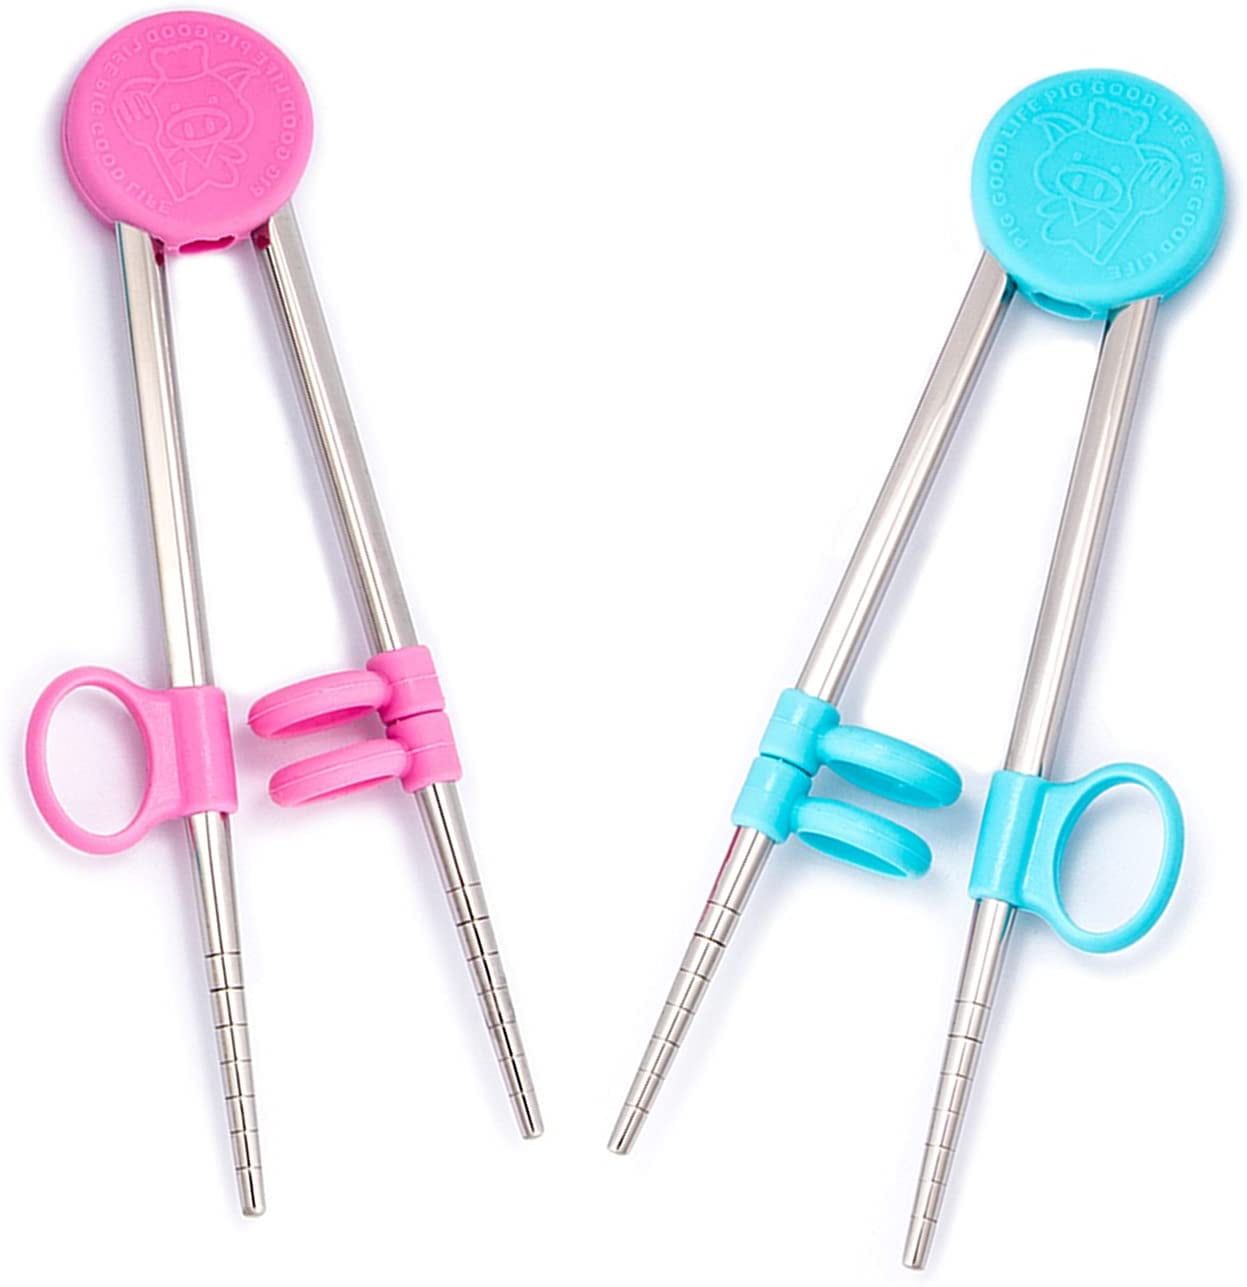 6.5Inchs stainless steel reusable kids chopsticks for learning and training.Two pairs of chopsticks pink+blue Adult and kid training chopsticks,Metal Children chopsticks 